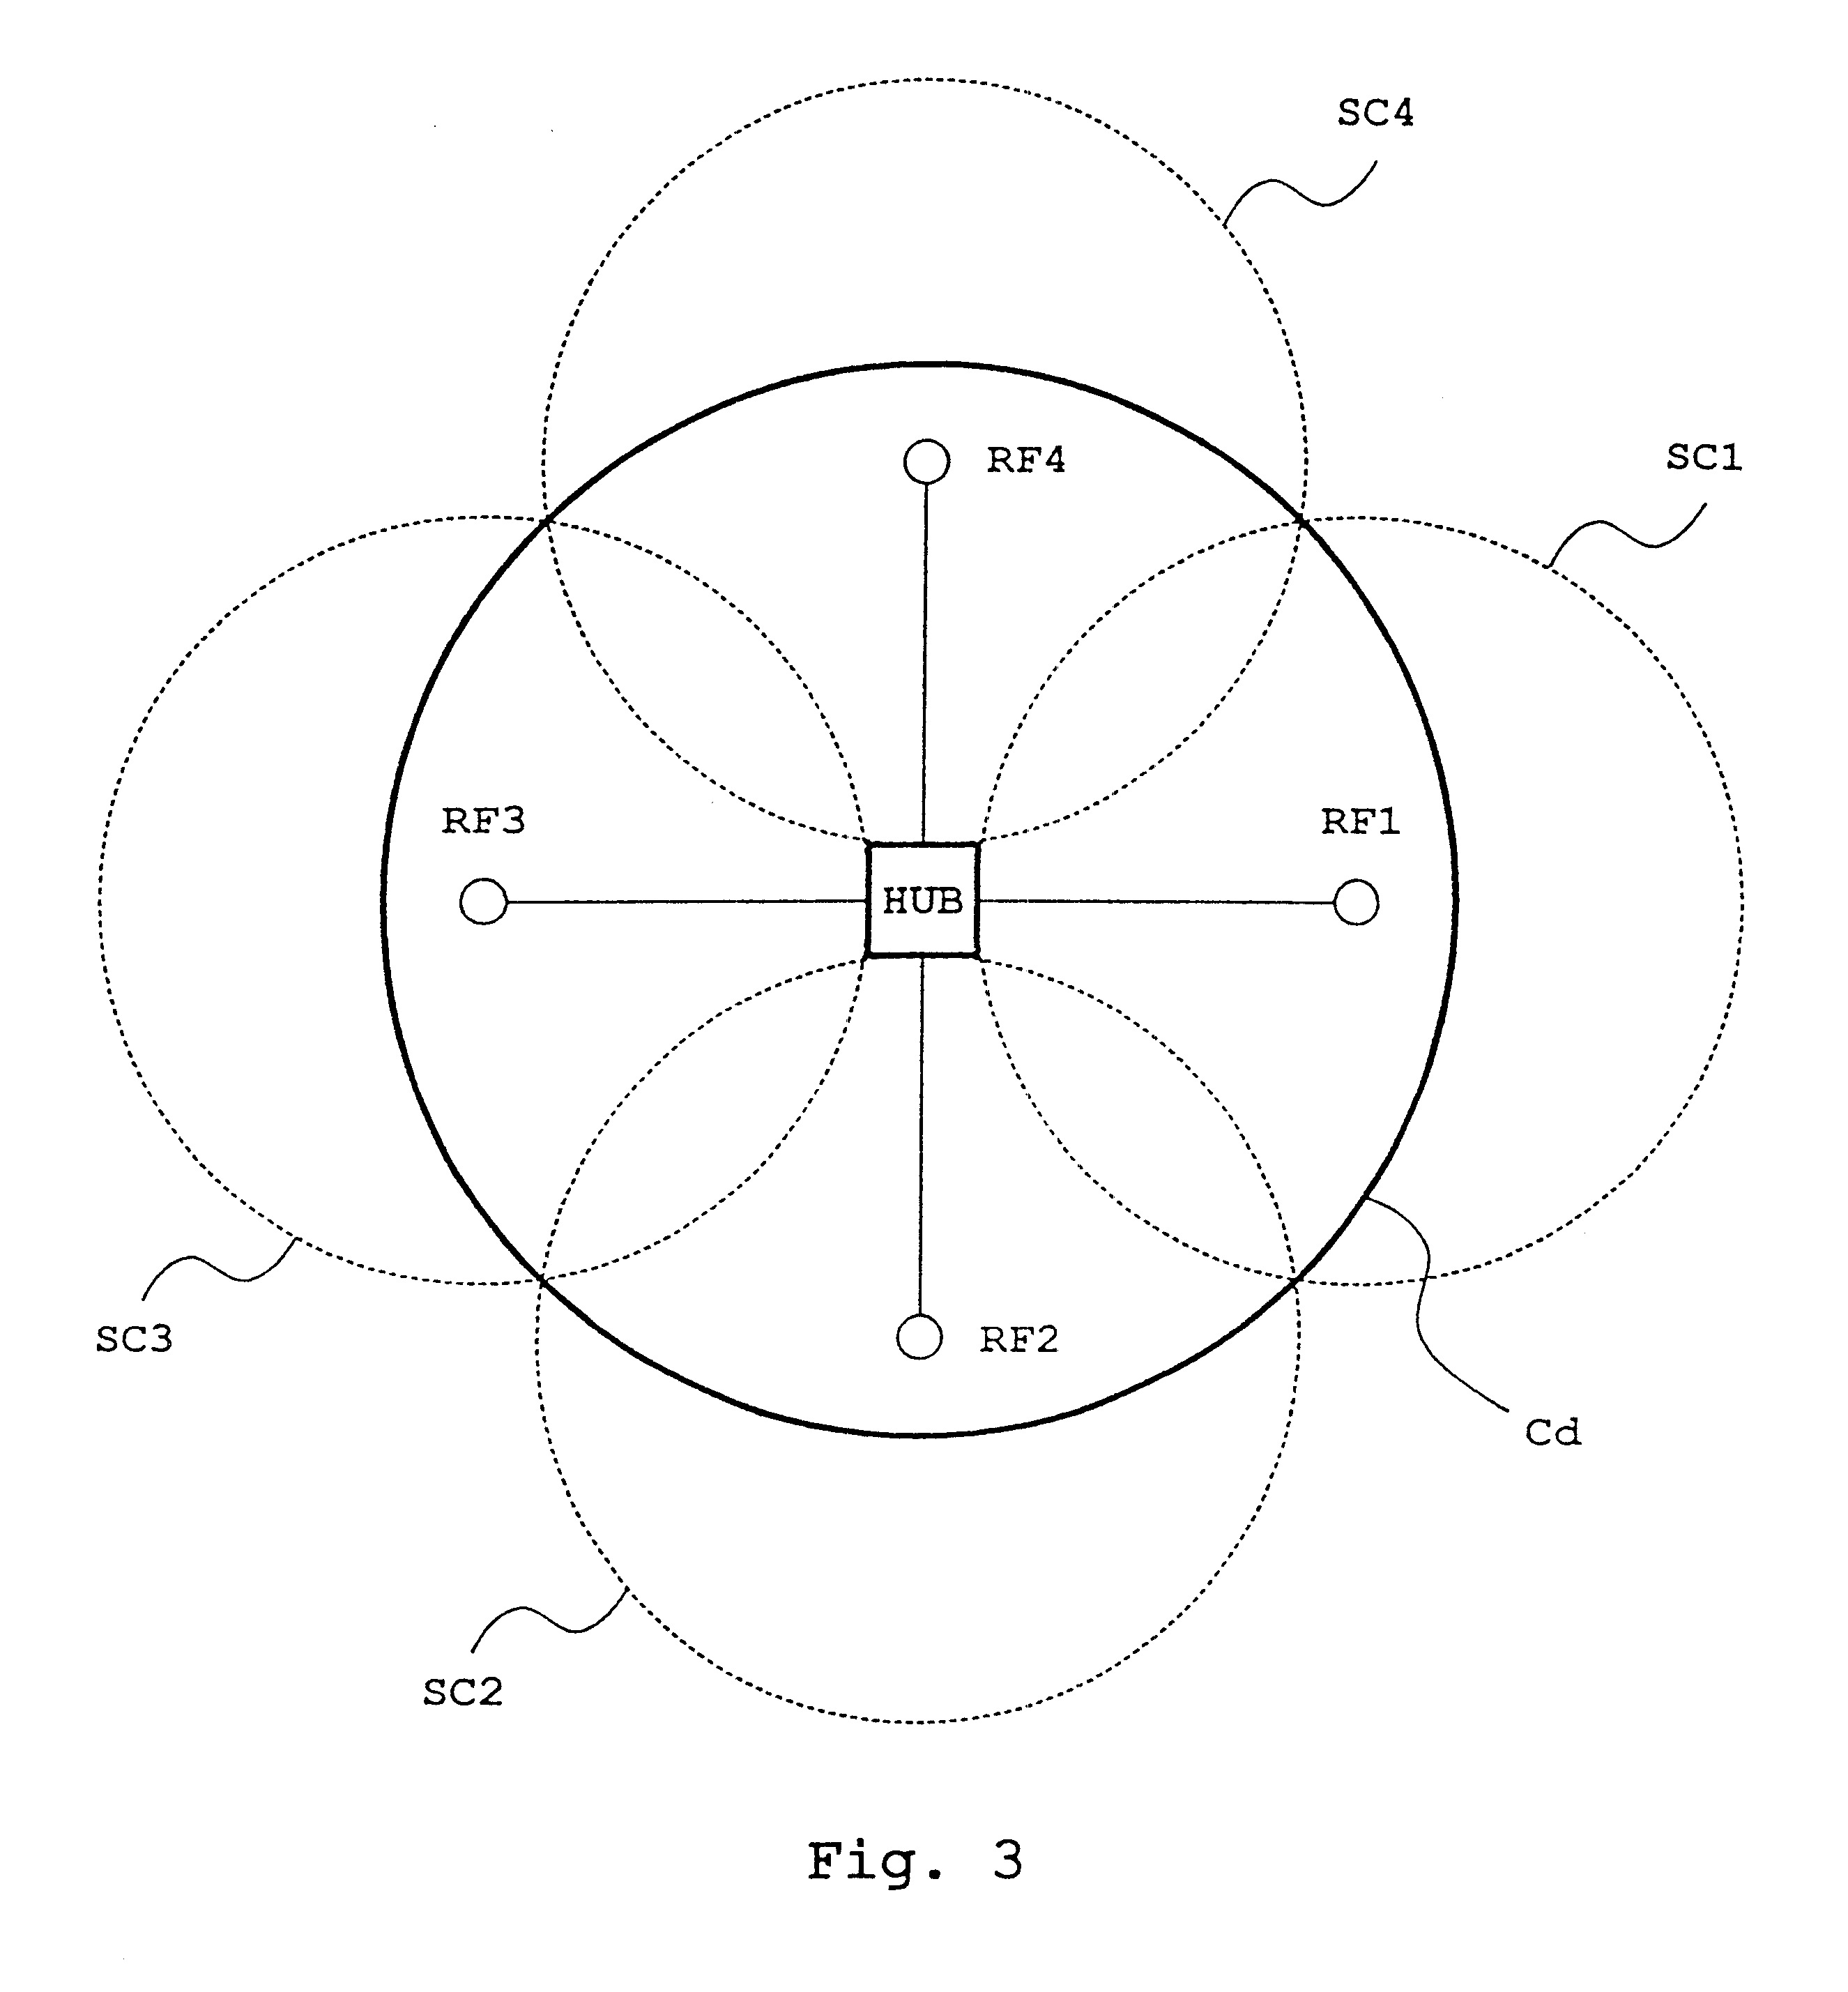 Method of implementing dynamic channel allocation in a cellular radio system